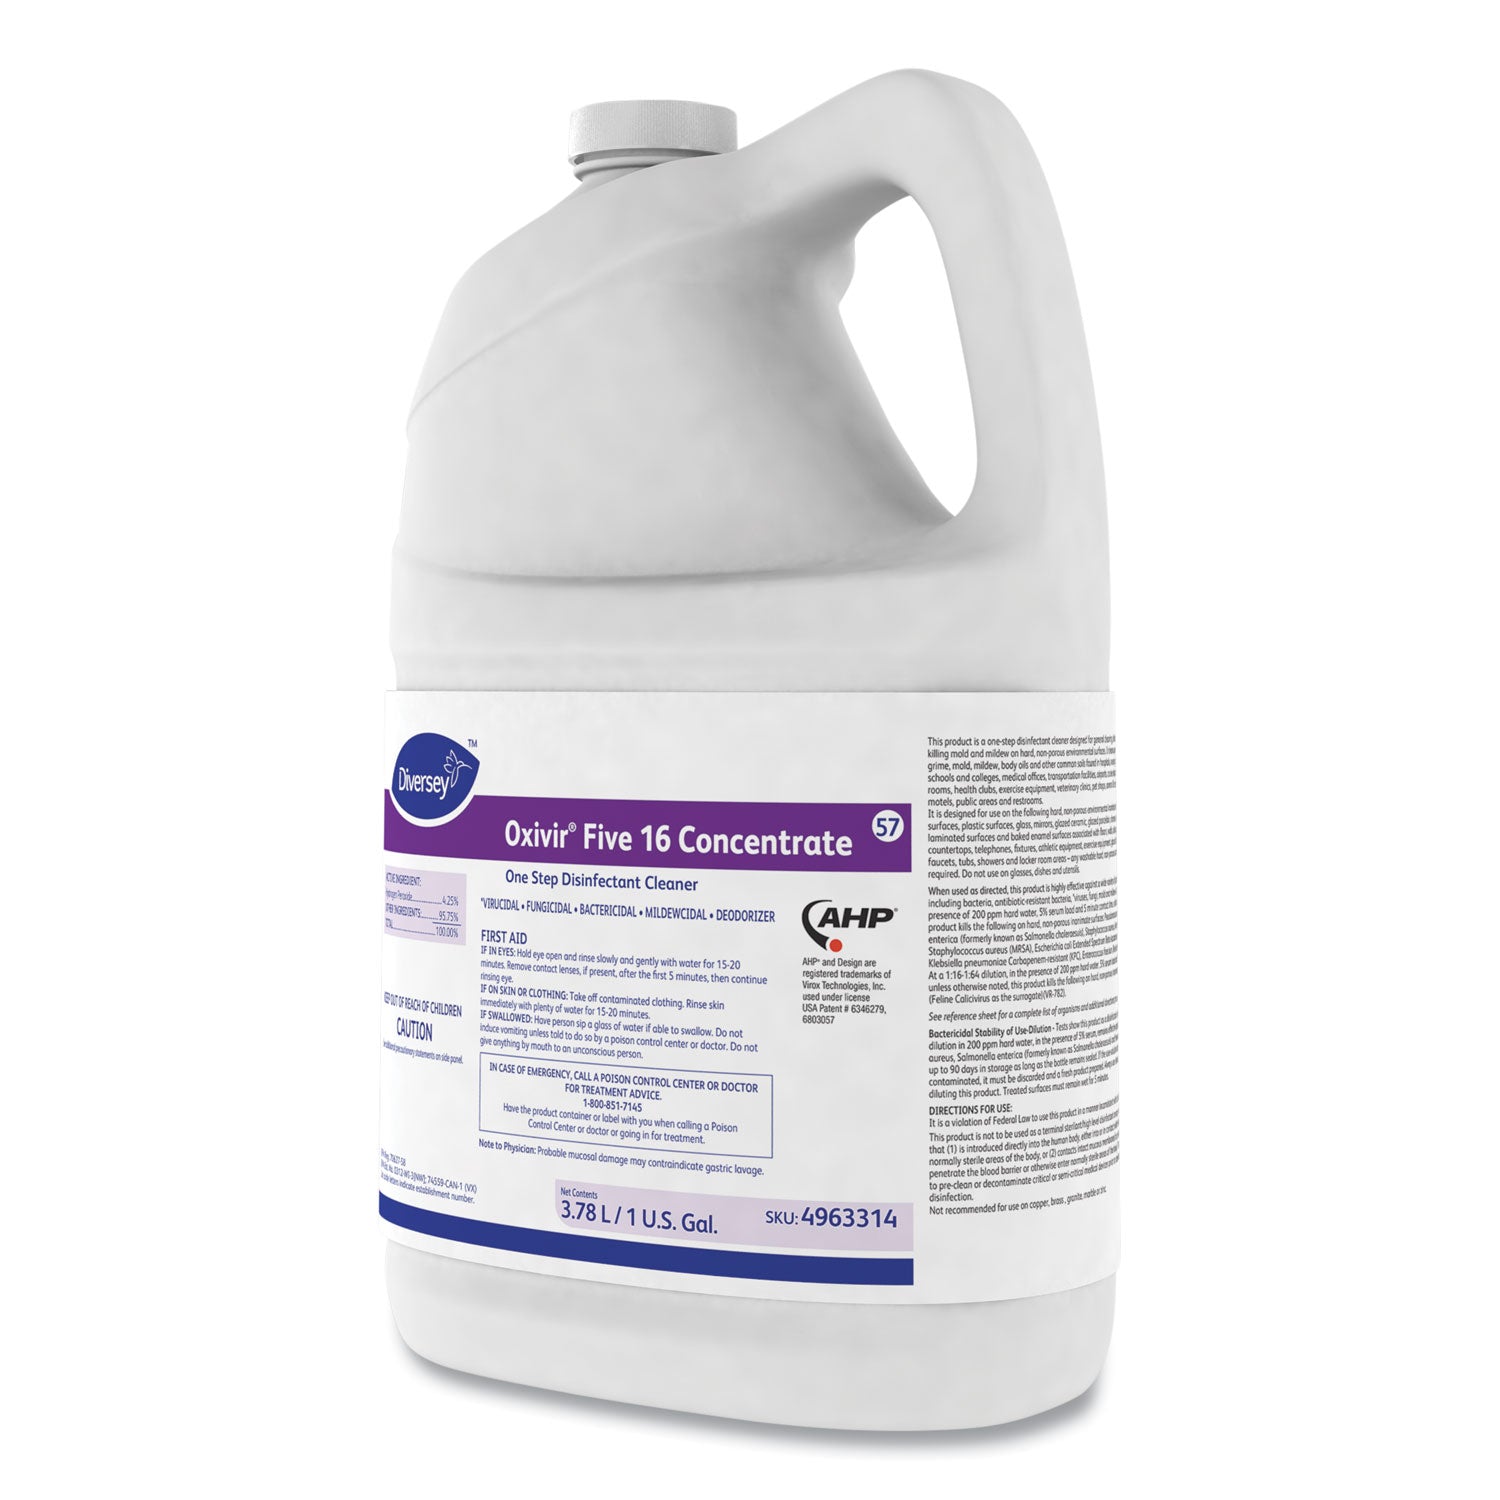 Five 16 One-Step Disinfectant Cleaner, 1 gal Bottle, 4/Carton - 